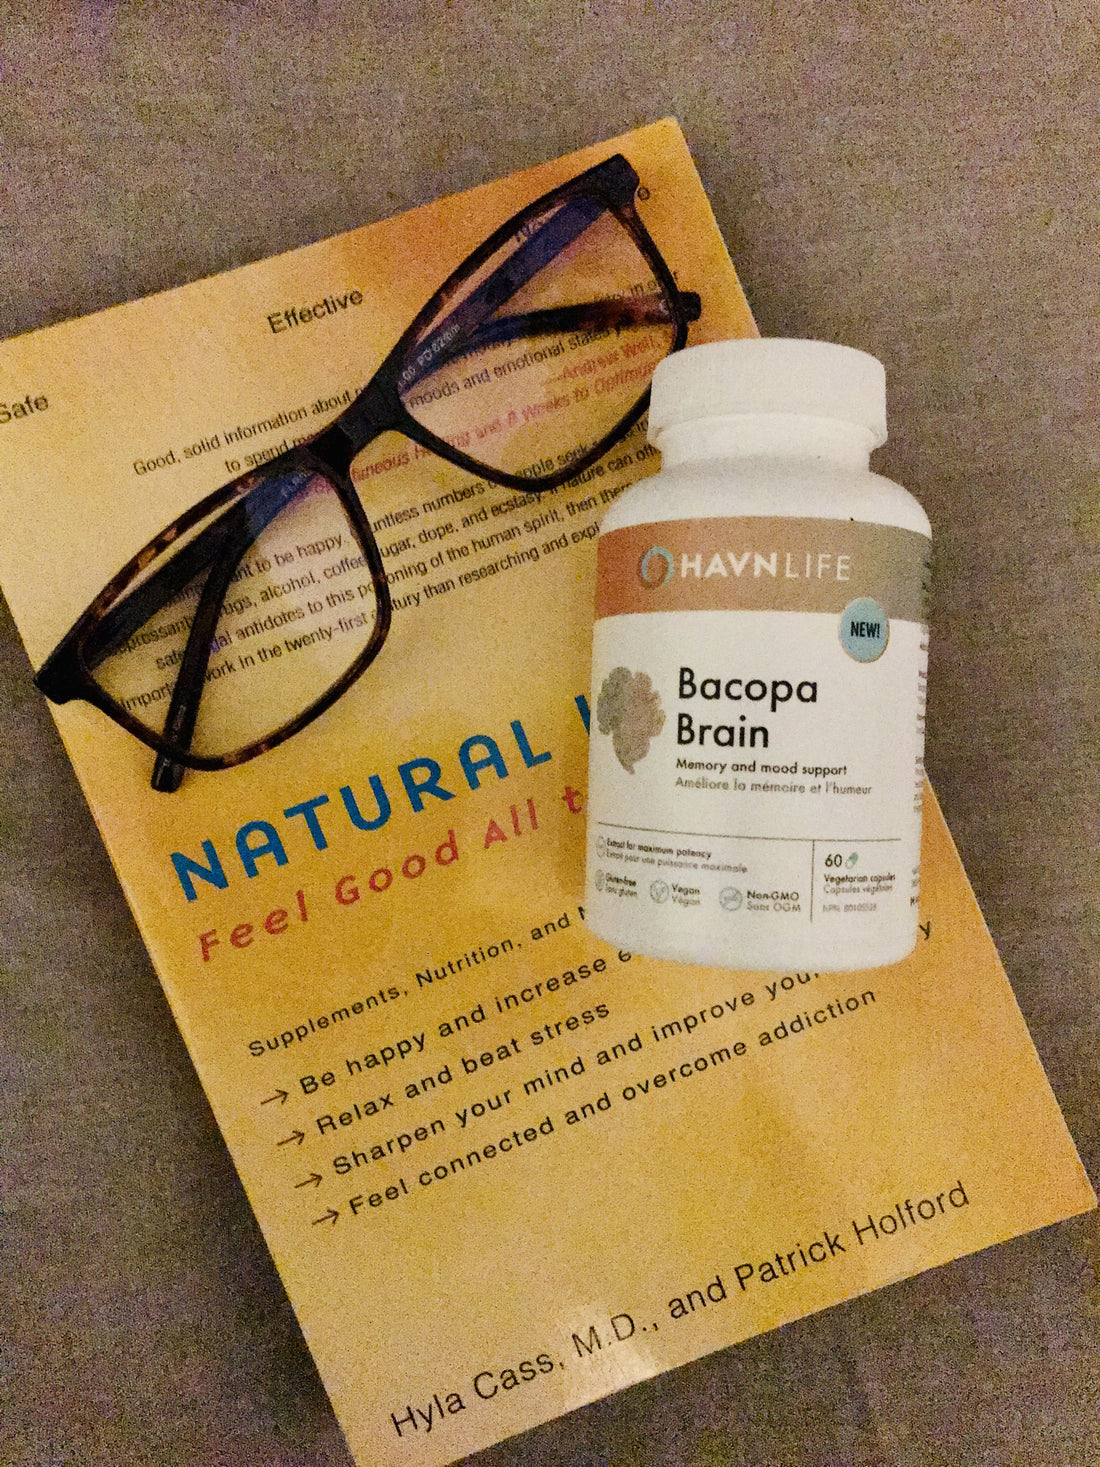 Memory and Mood Support (Havnlife Bacopa Brain)